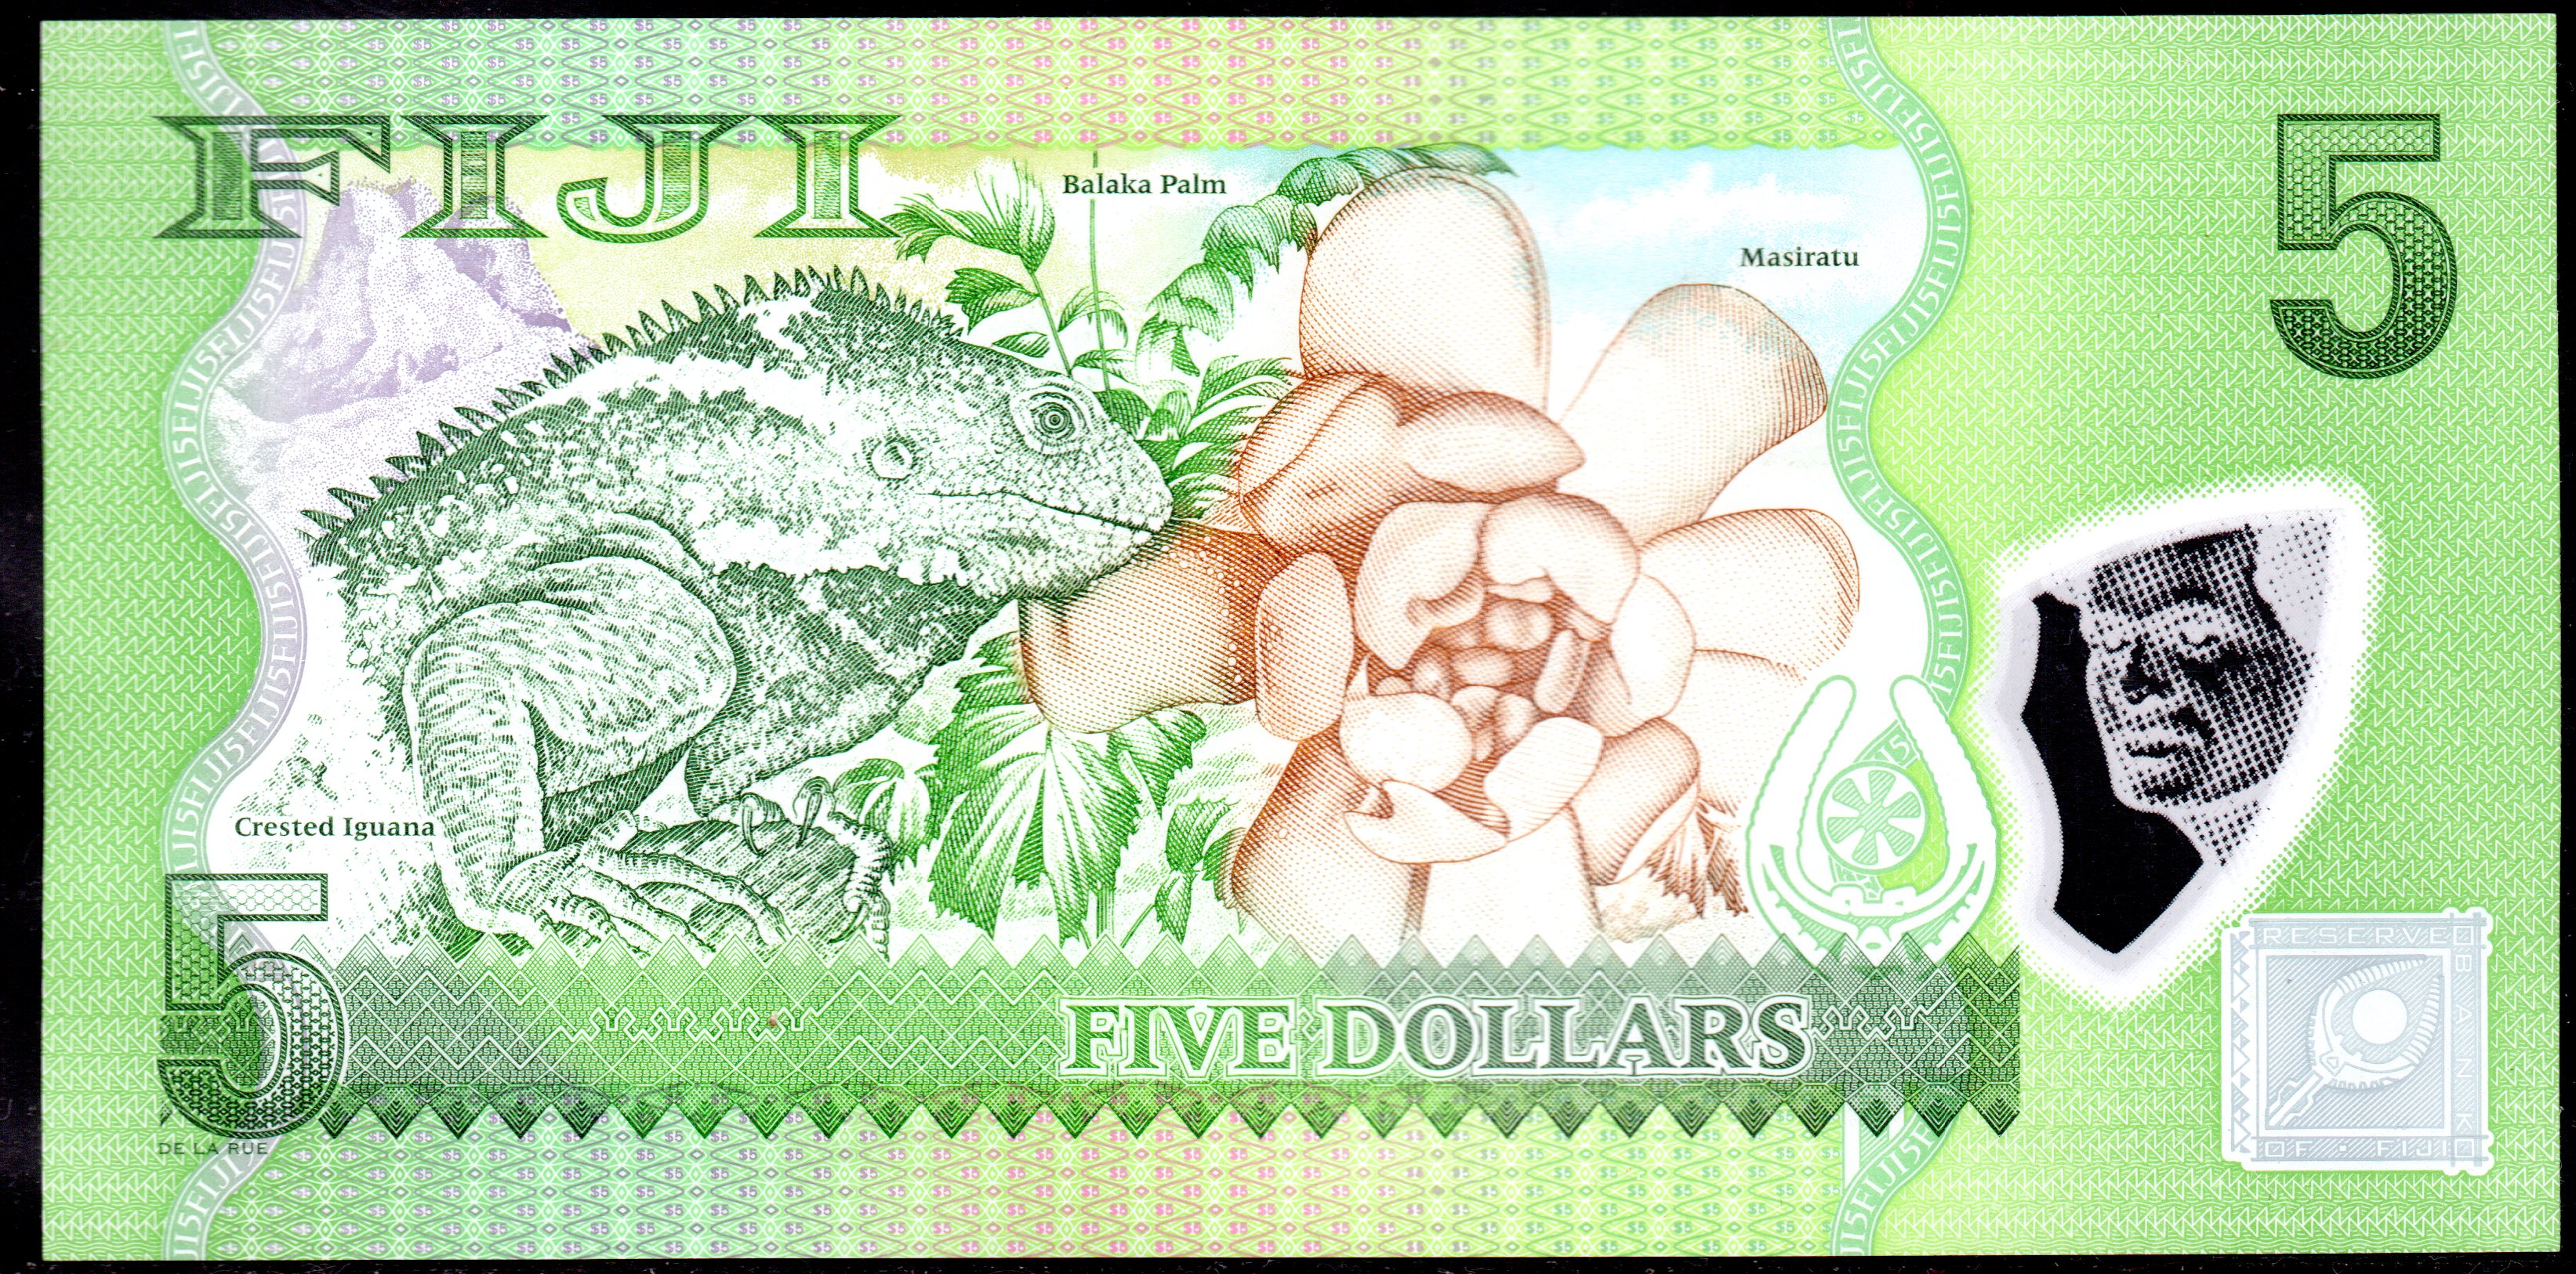 Banknote Fiji   $ 5 Dollars, 2012, Polymer, P-115R, "Replacement Note" UNC